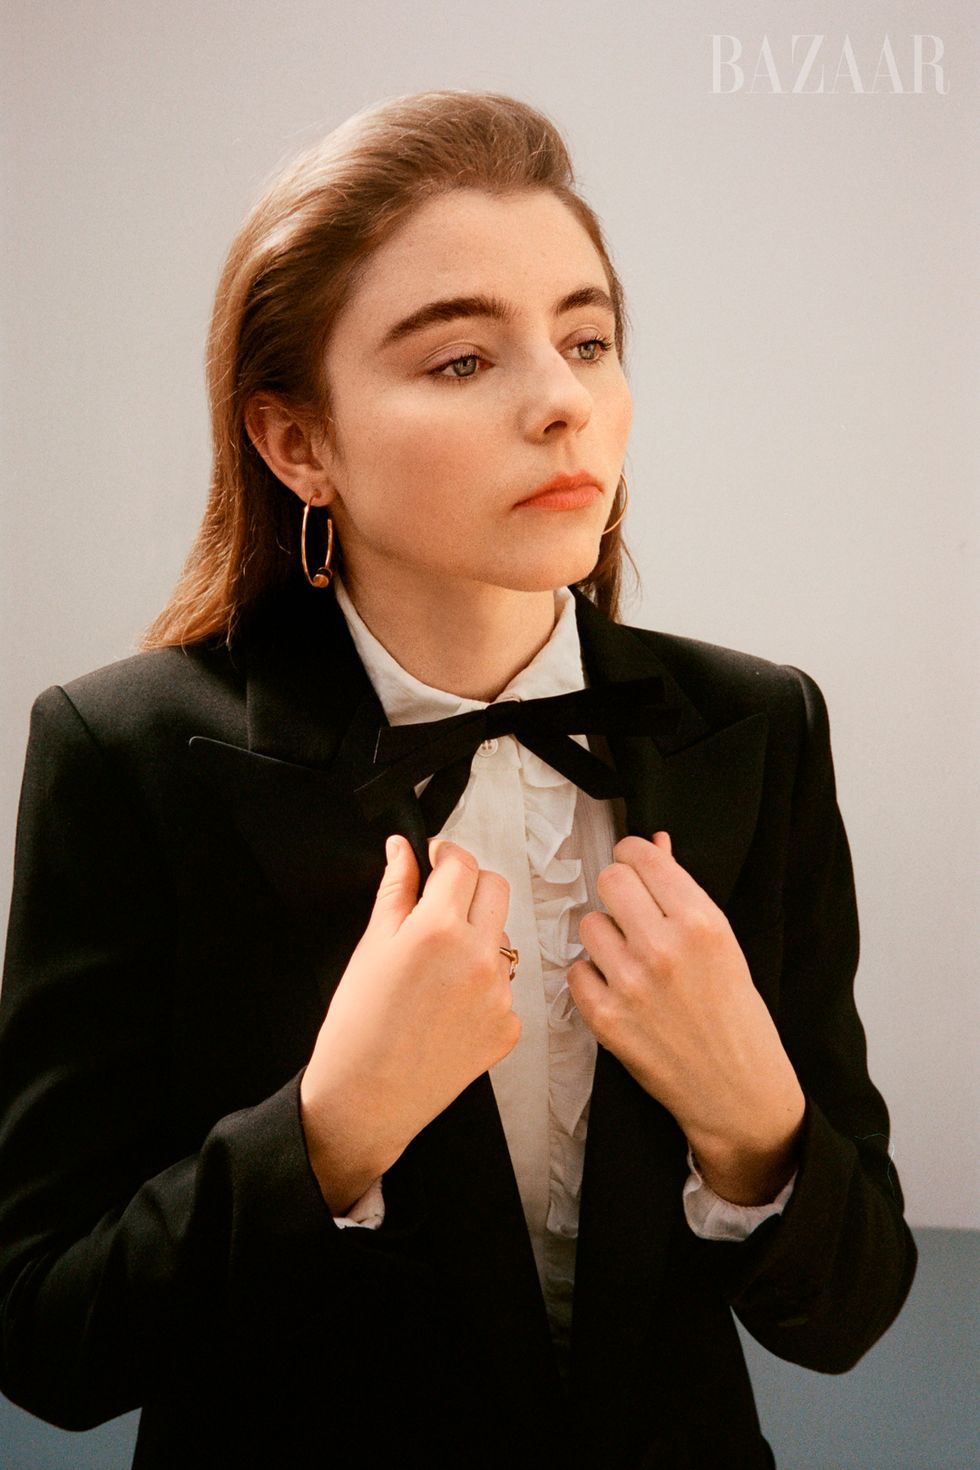 thomasin poses by pulling on lapels of suit jacket